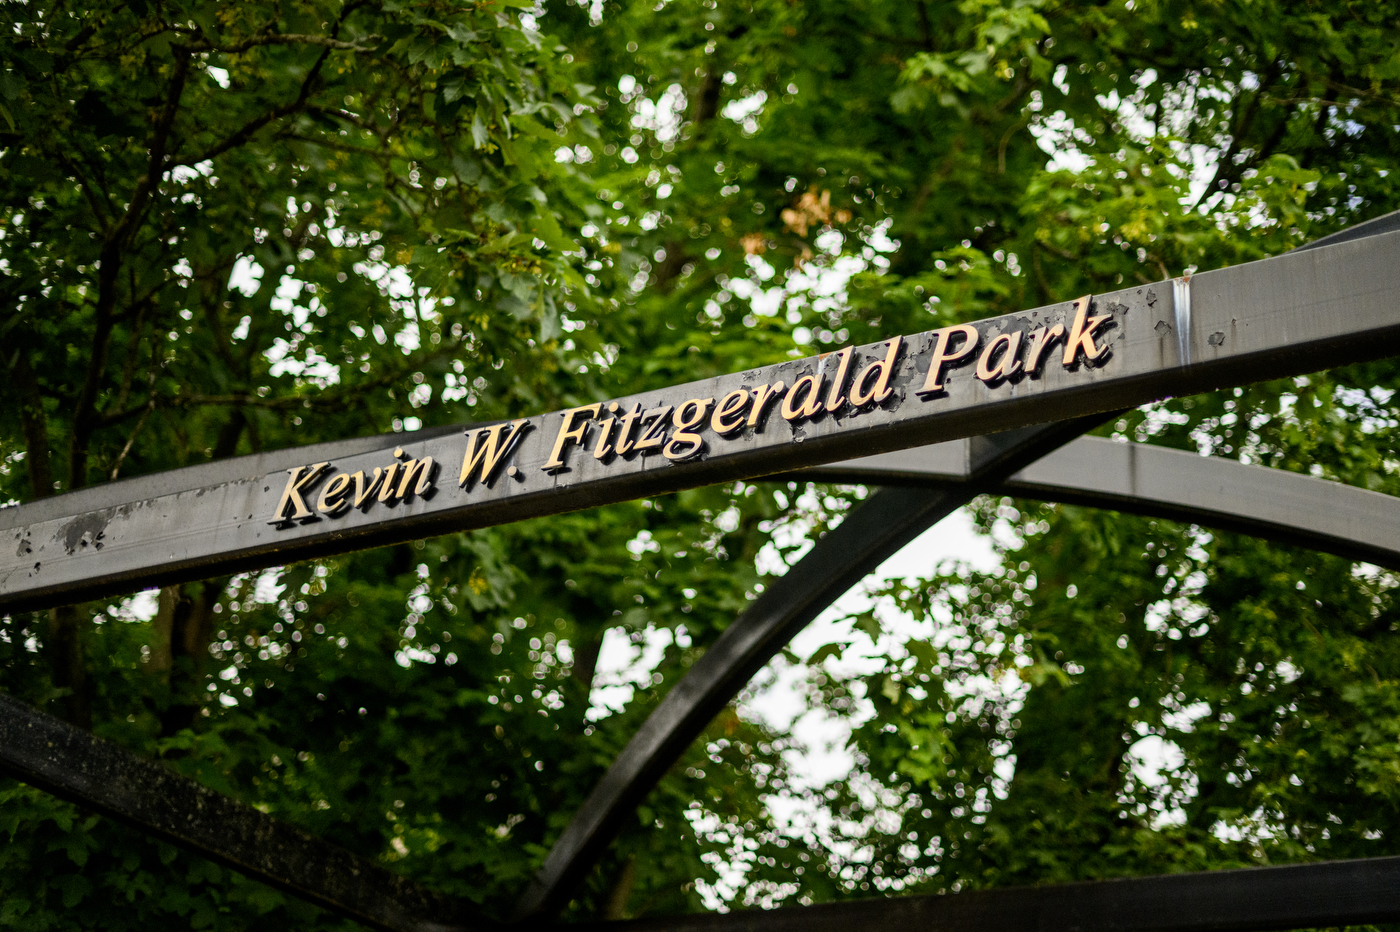 wooden arbor with "Kevin W Fitzgerald Park" on it